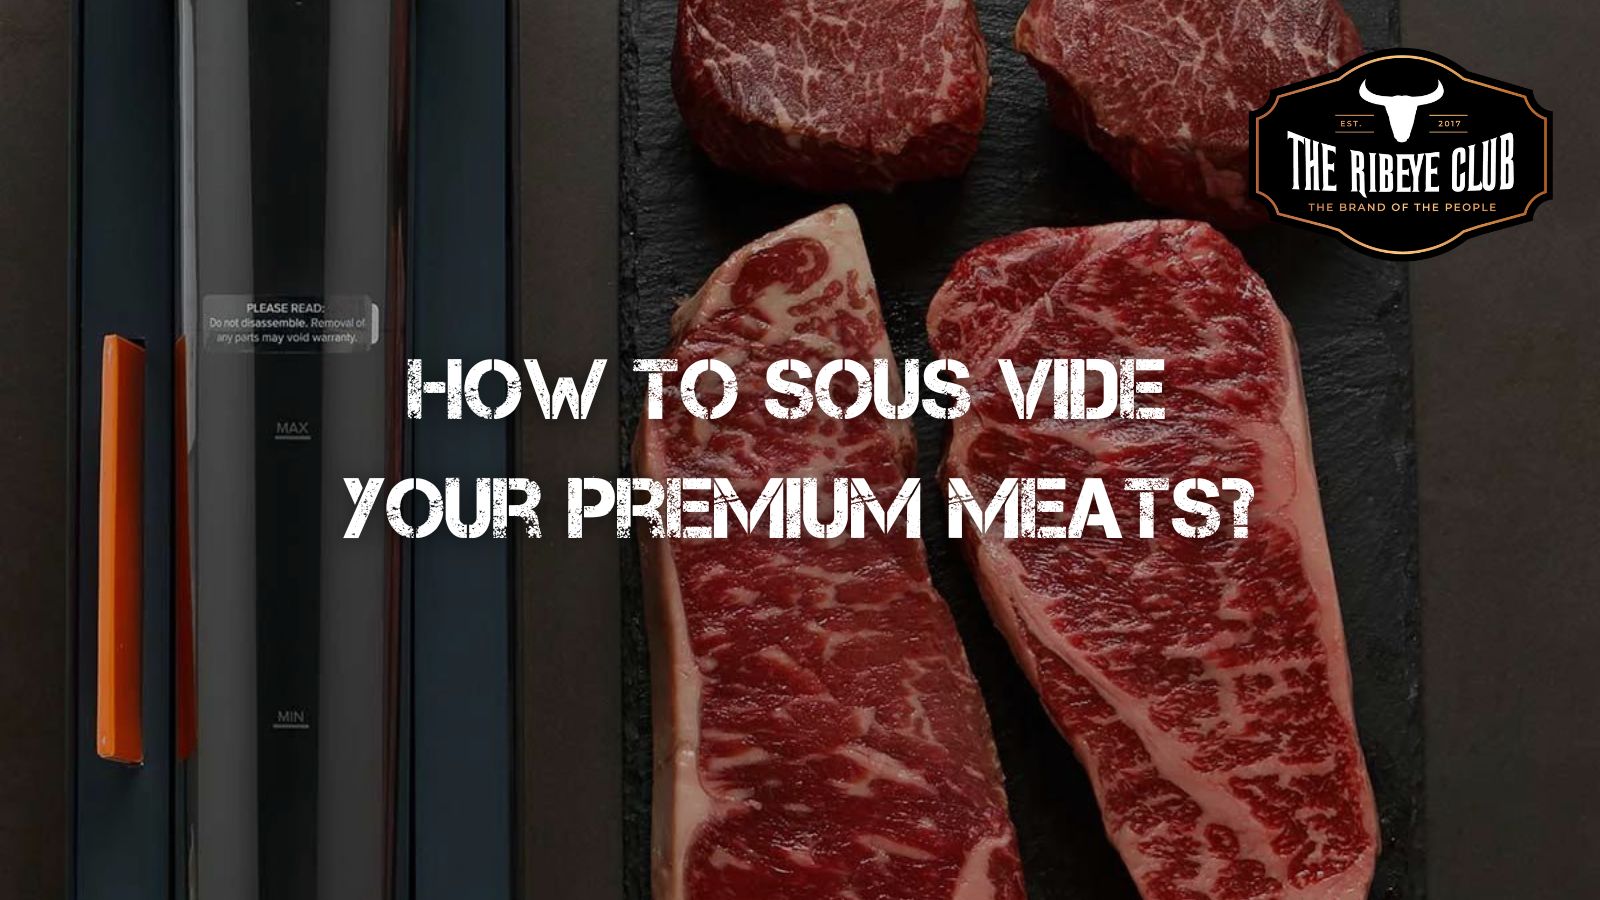 How to Sous Vide Your Premium Meats?